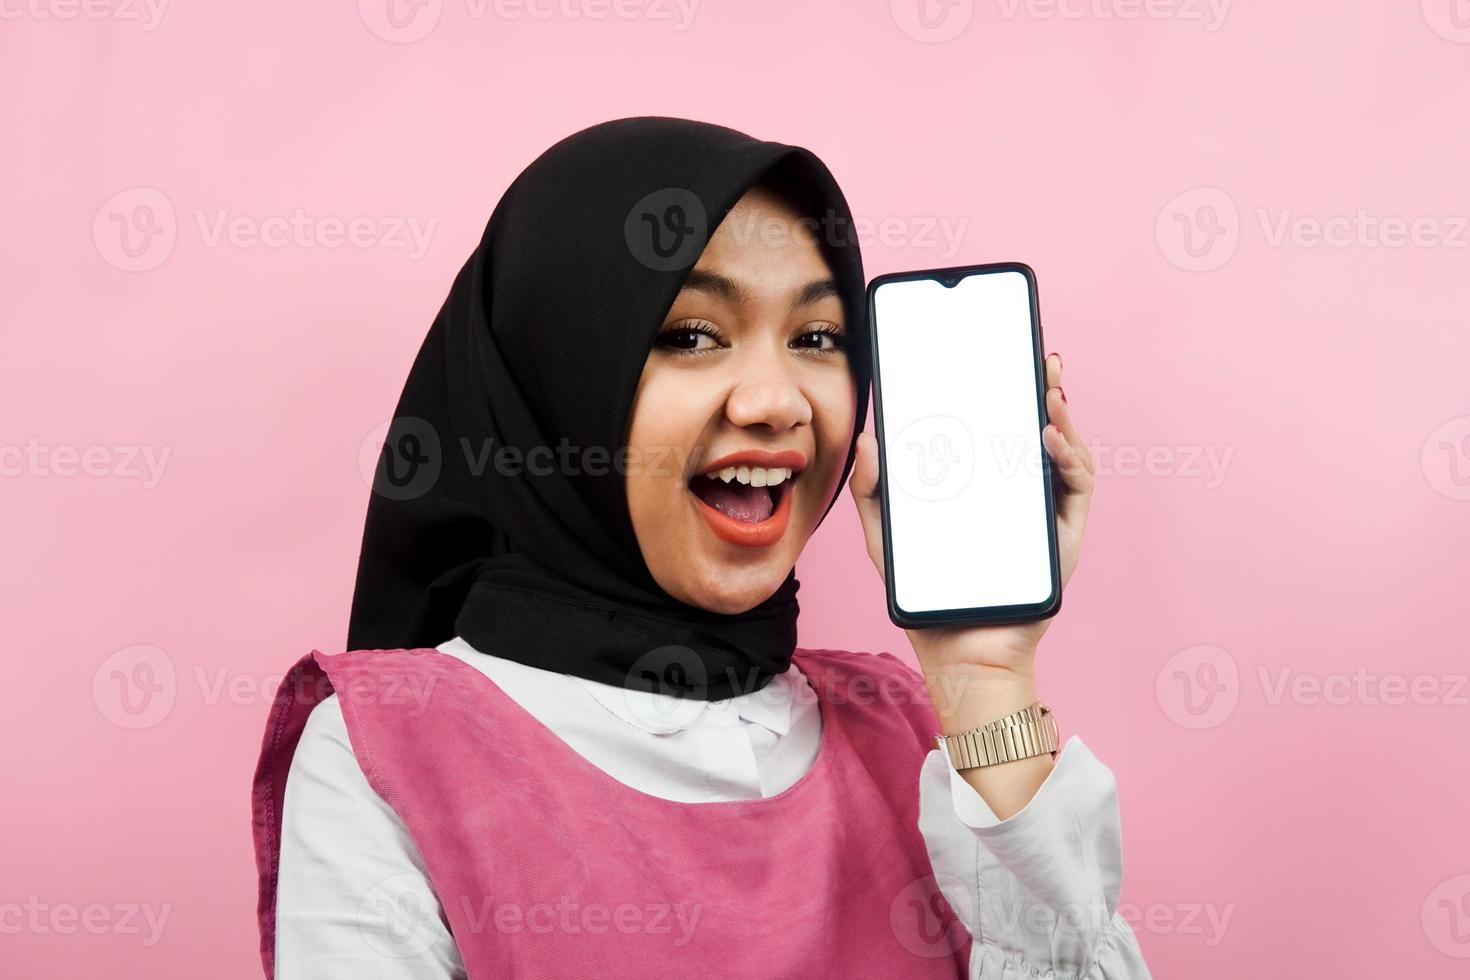 Close-up of beautiful and cheerful young Muslim woman holding smartphone with white or blank screen, promoting app, promoting something, isolated, advertising concept photo